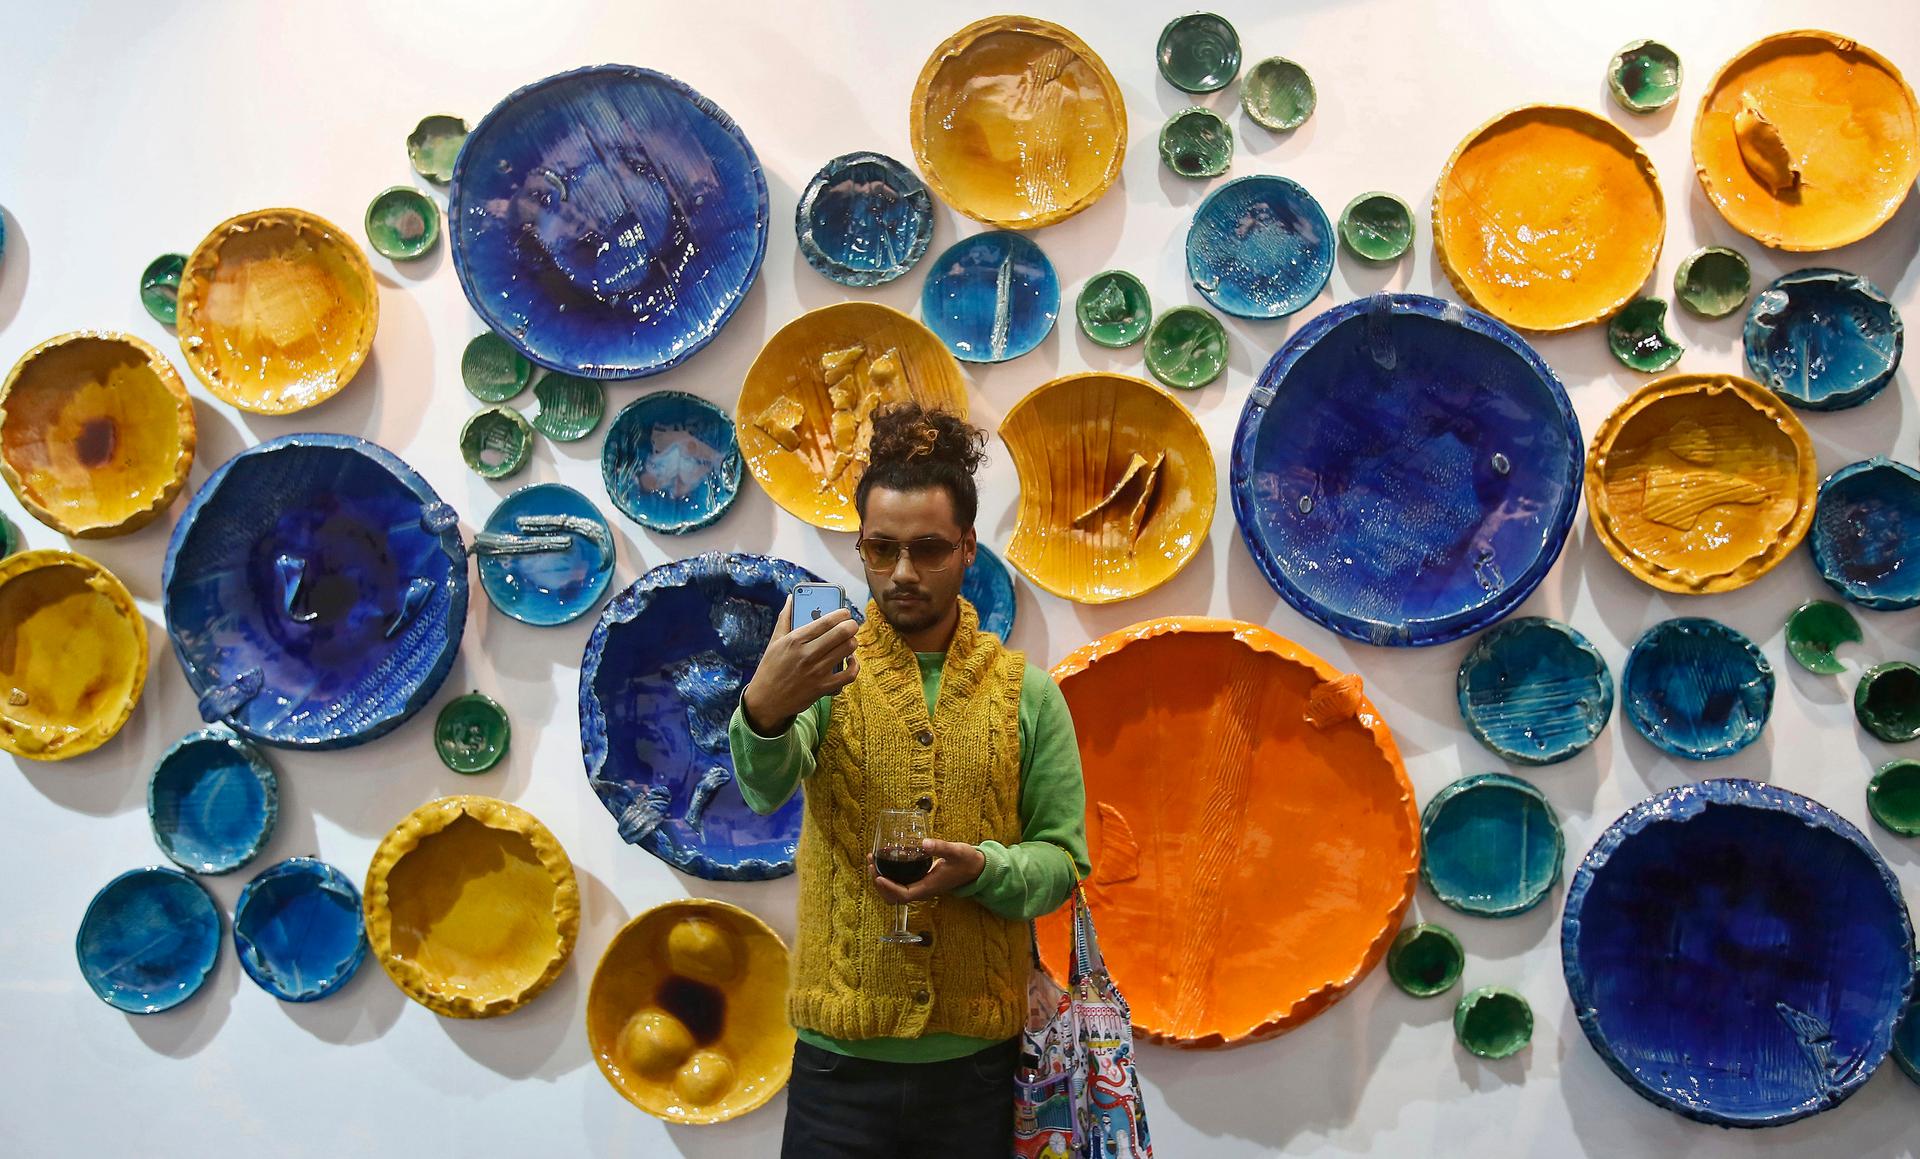 A visitor takes a "selfie" in front of art exhibit "Circle Uncircled" by artist Rahul Kumar.